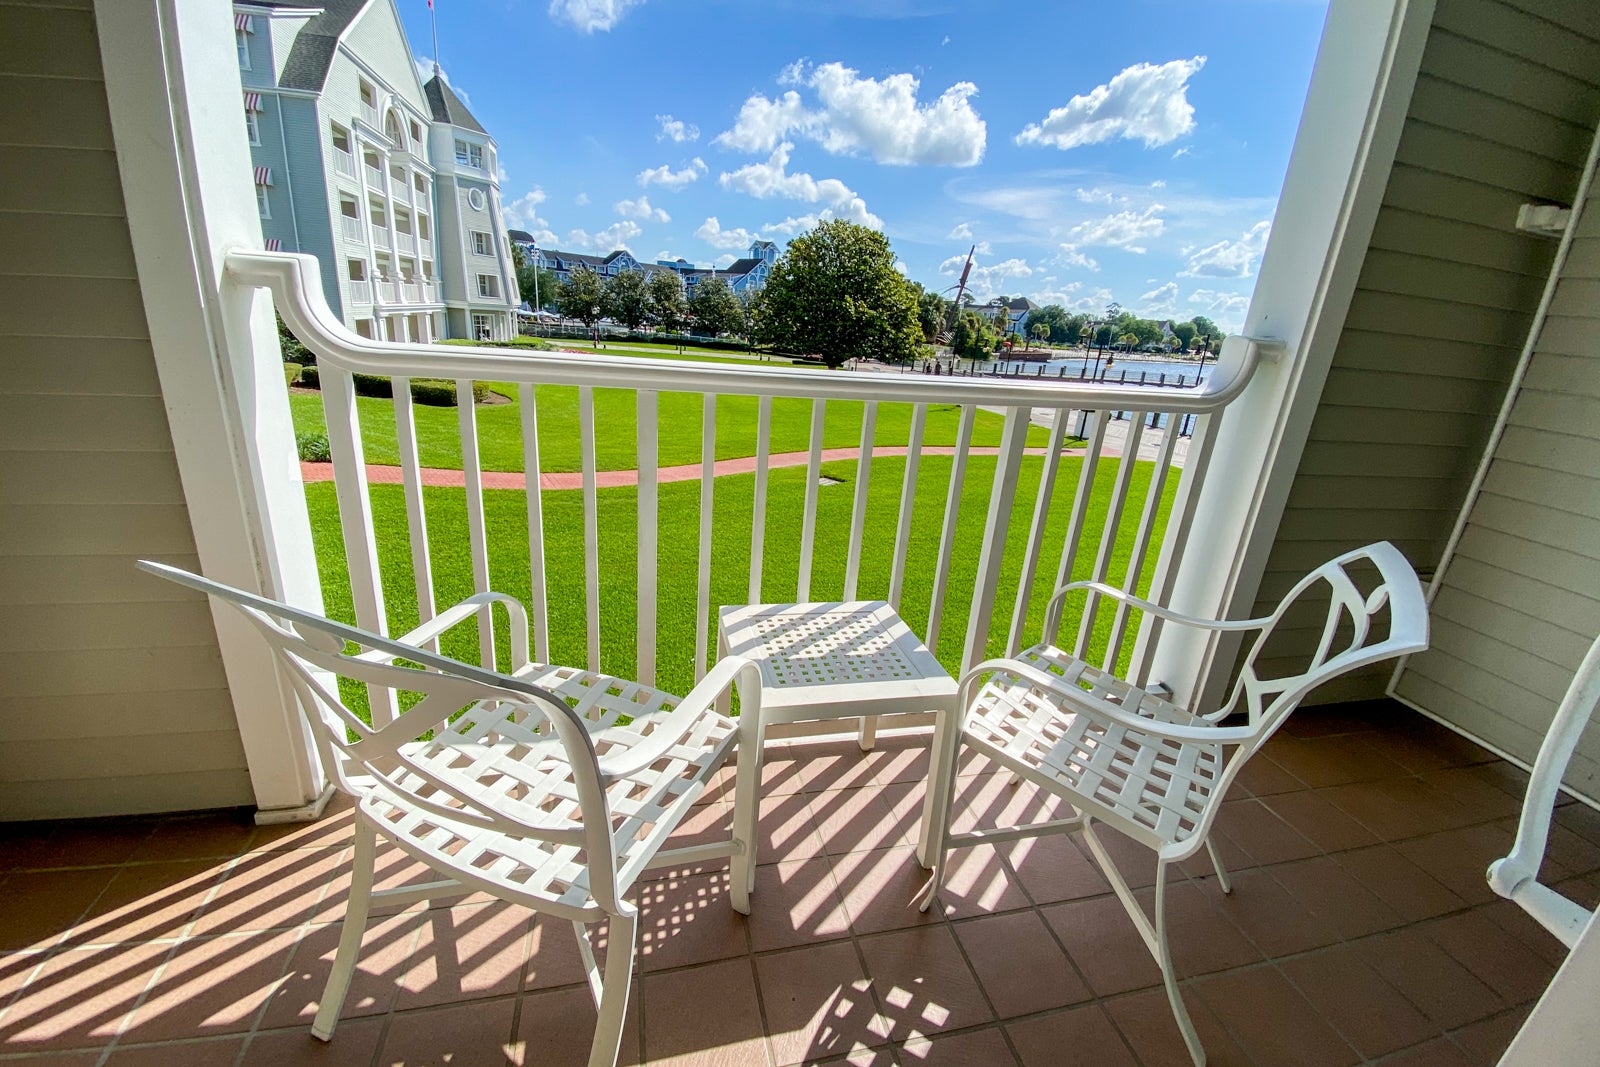 do all yacht club rooms have balconies